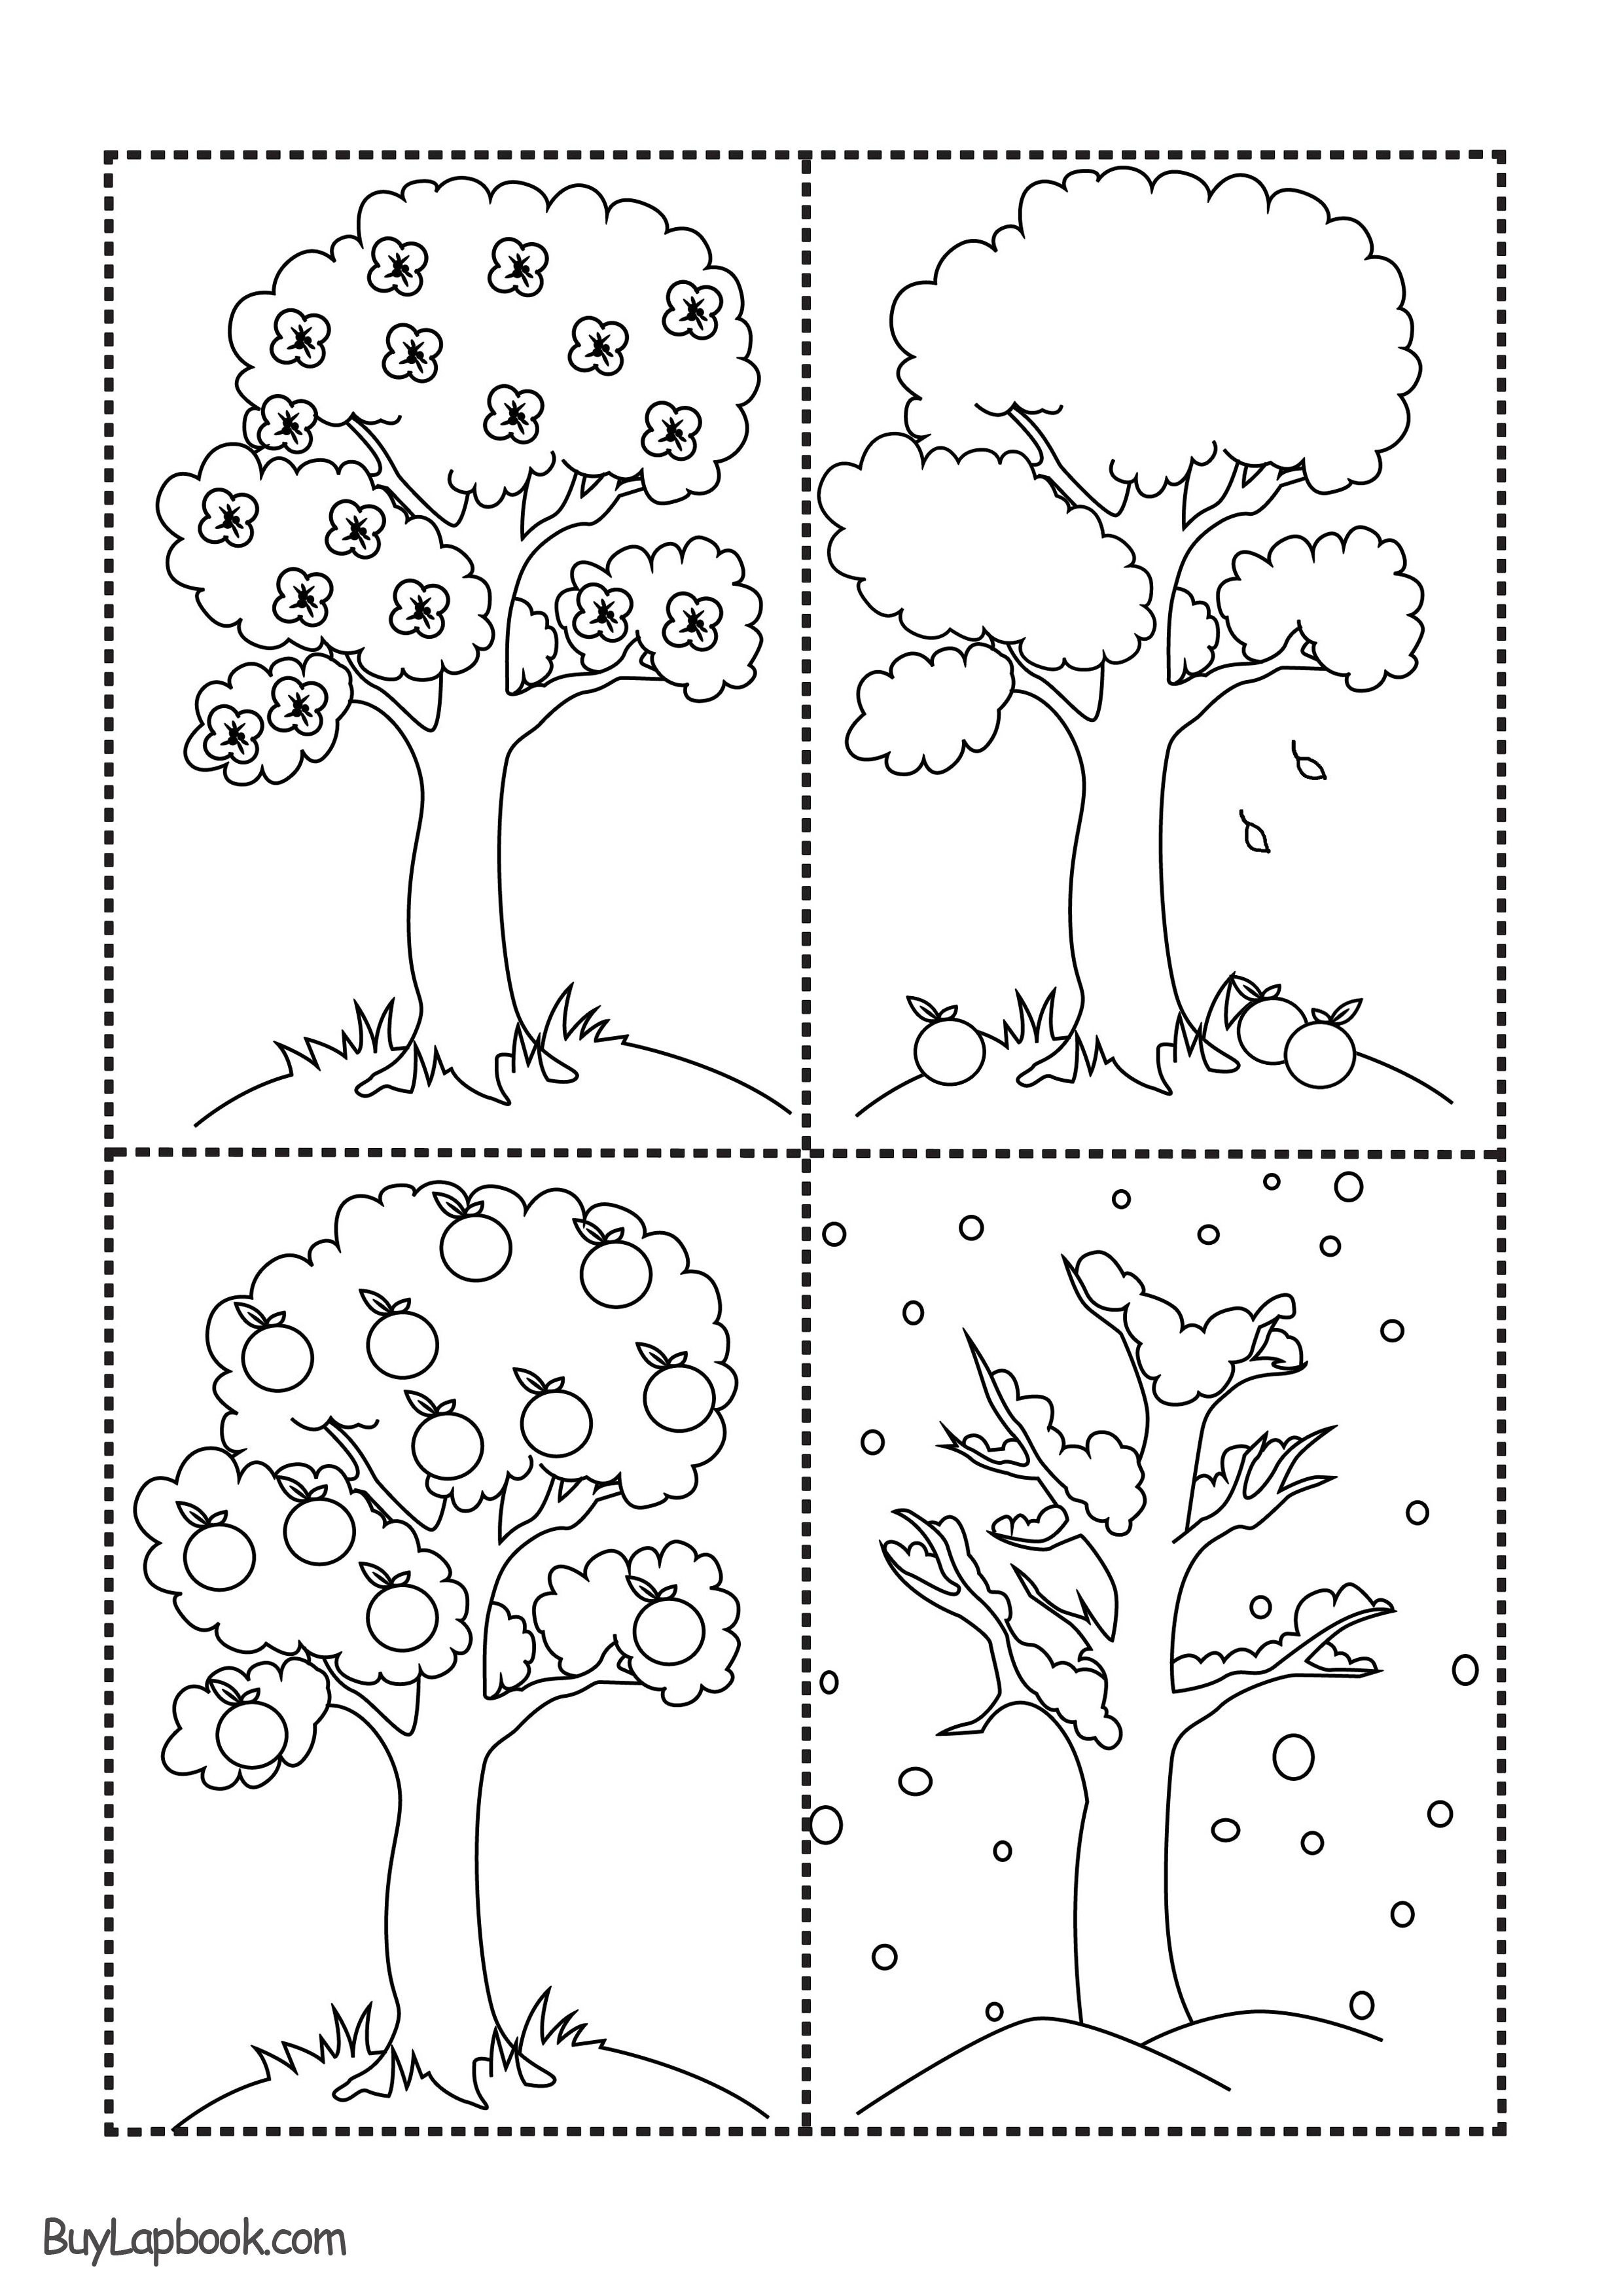 The Four Seasons of the Apple Tree Printables | BuyLapbook